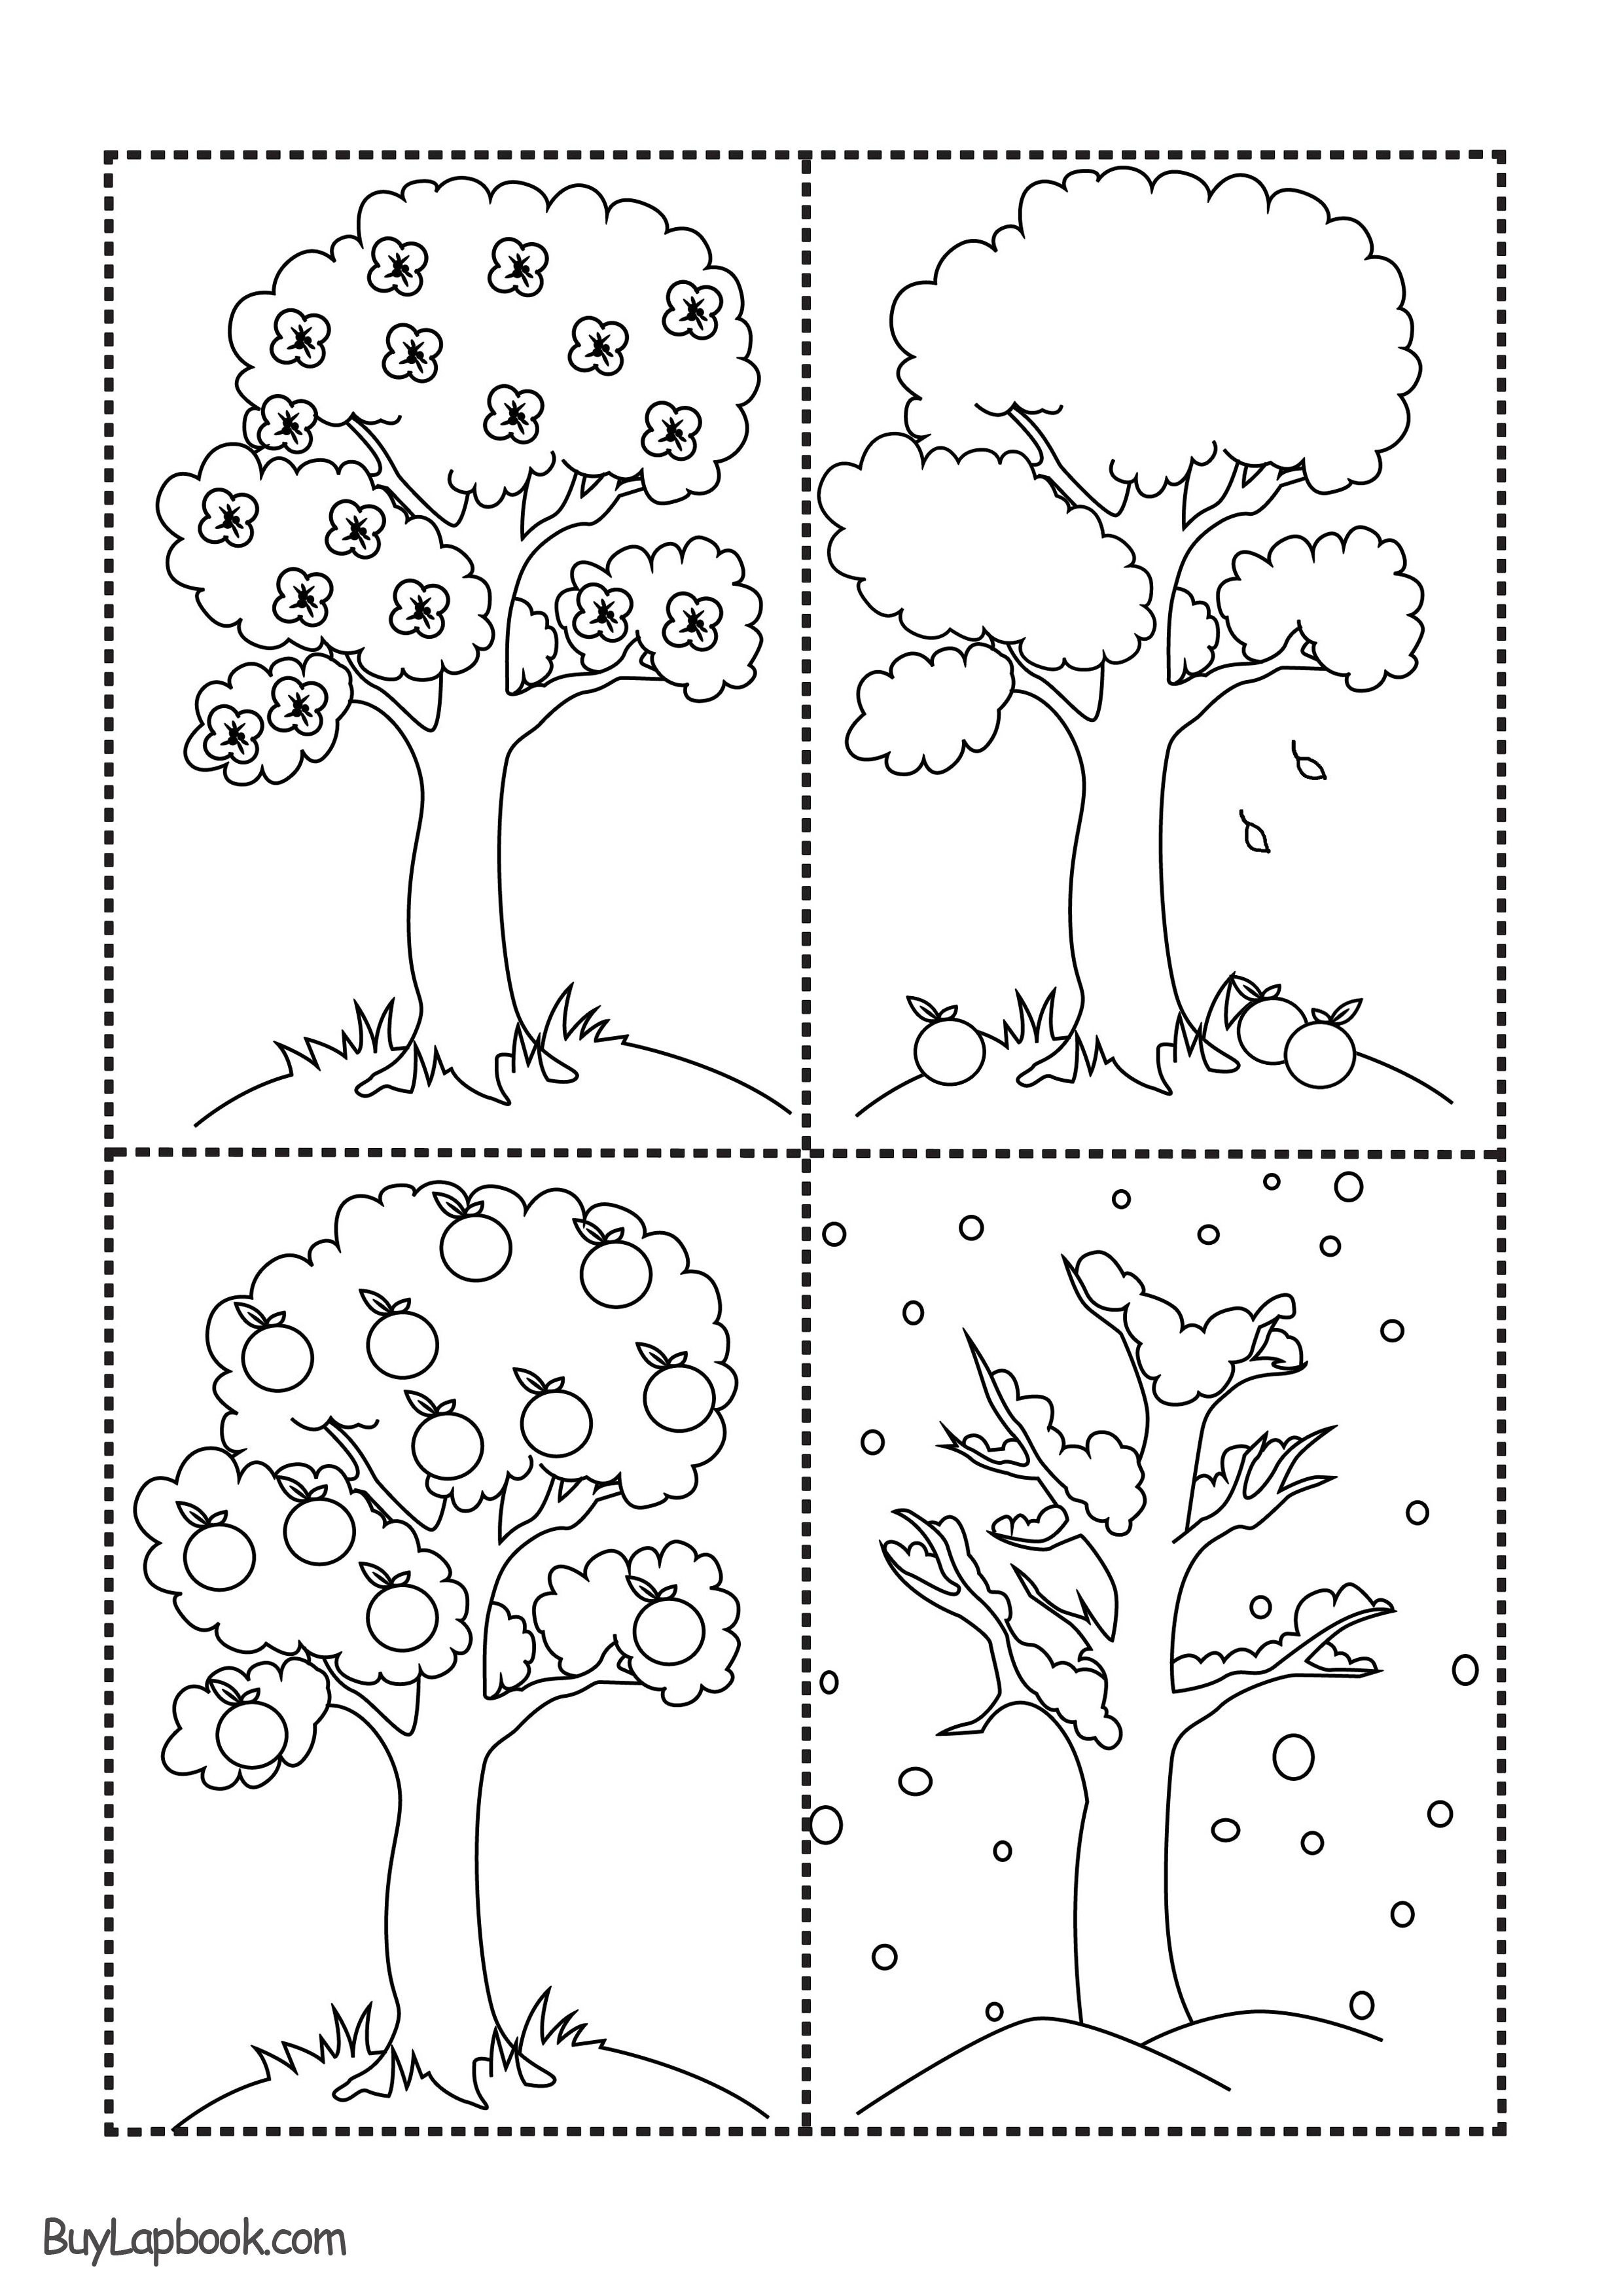 The Four Seasons of the Apple Tree Printables | BuyLapbook